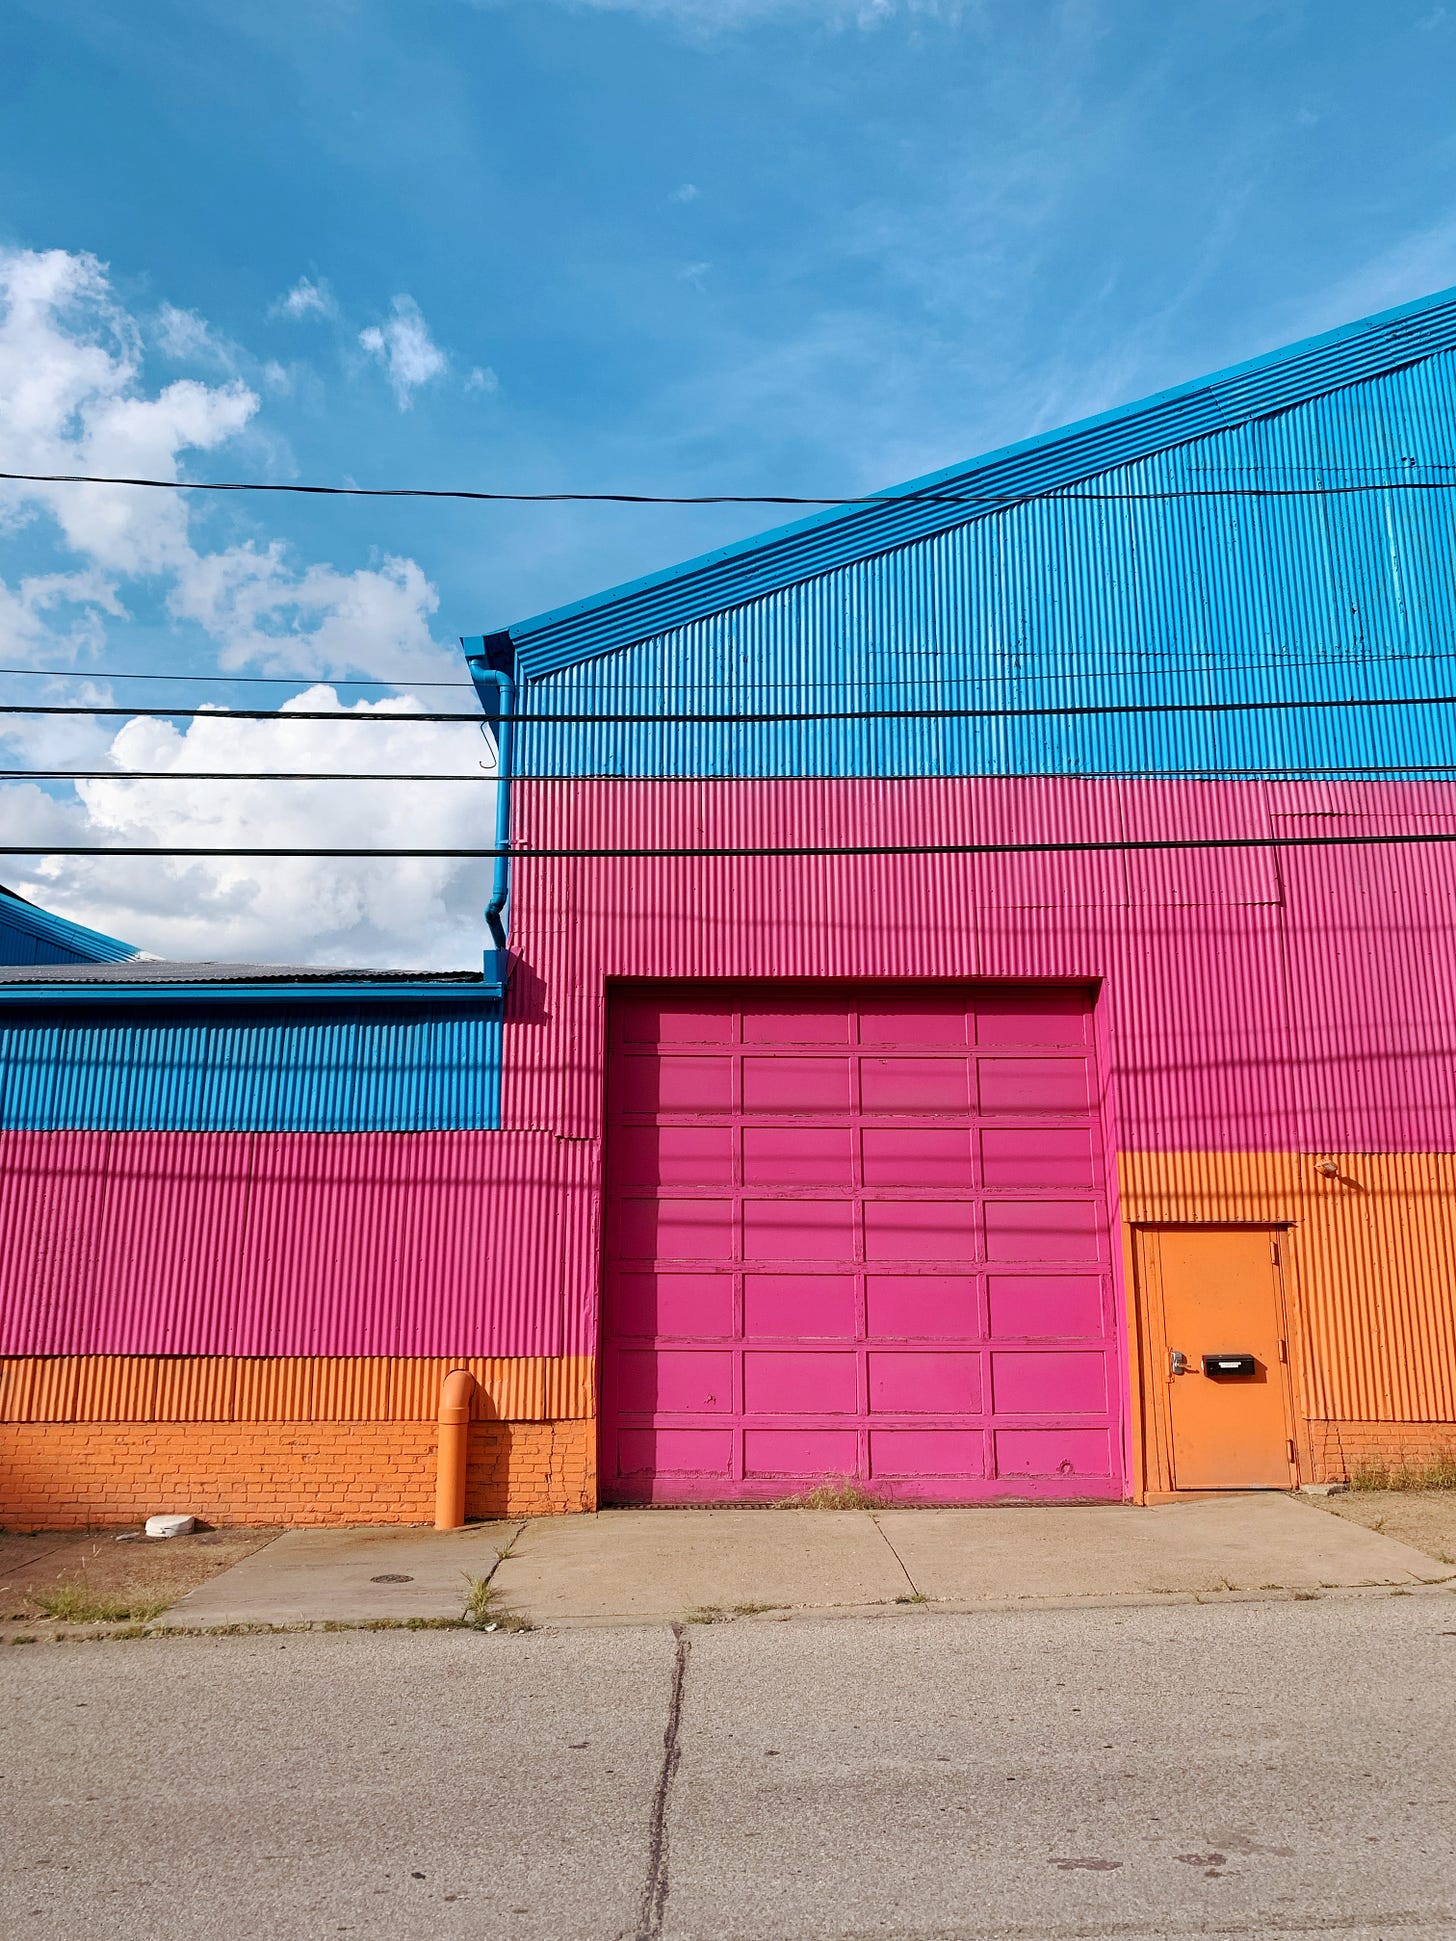 Very colorful (blue, pink, orange) warehouse